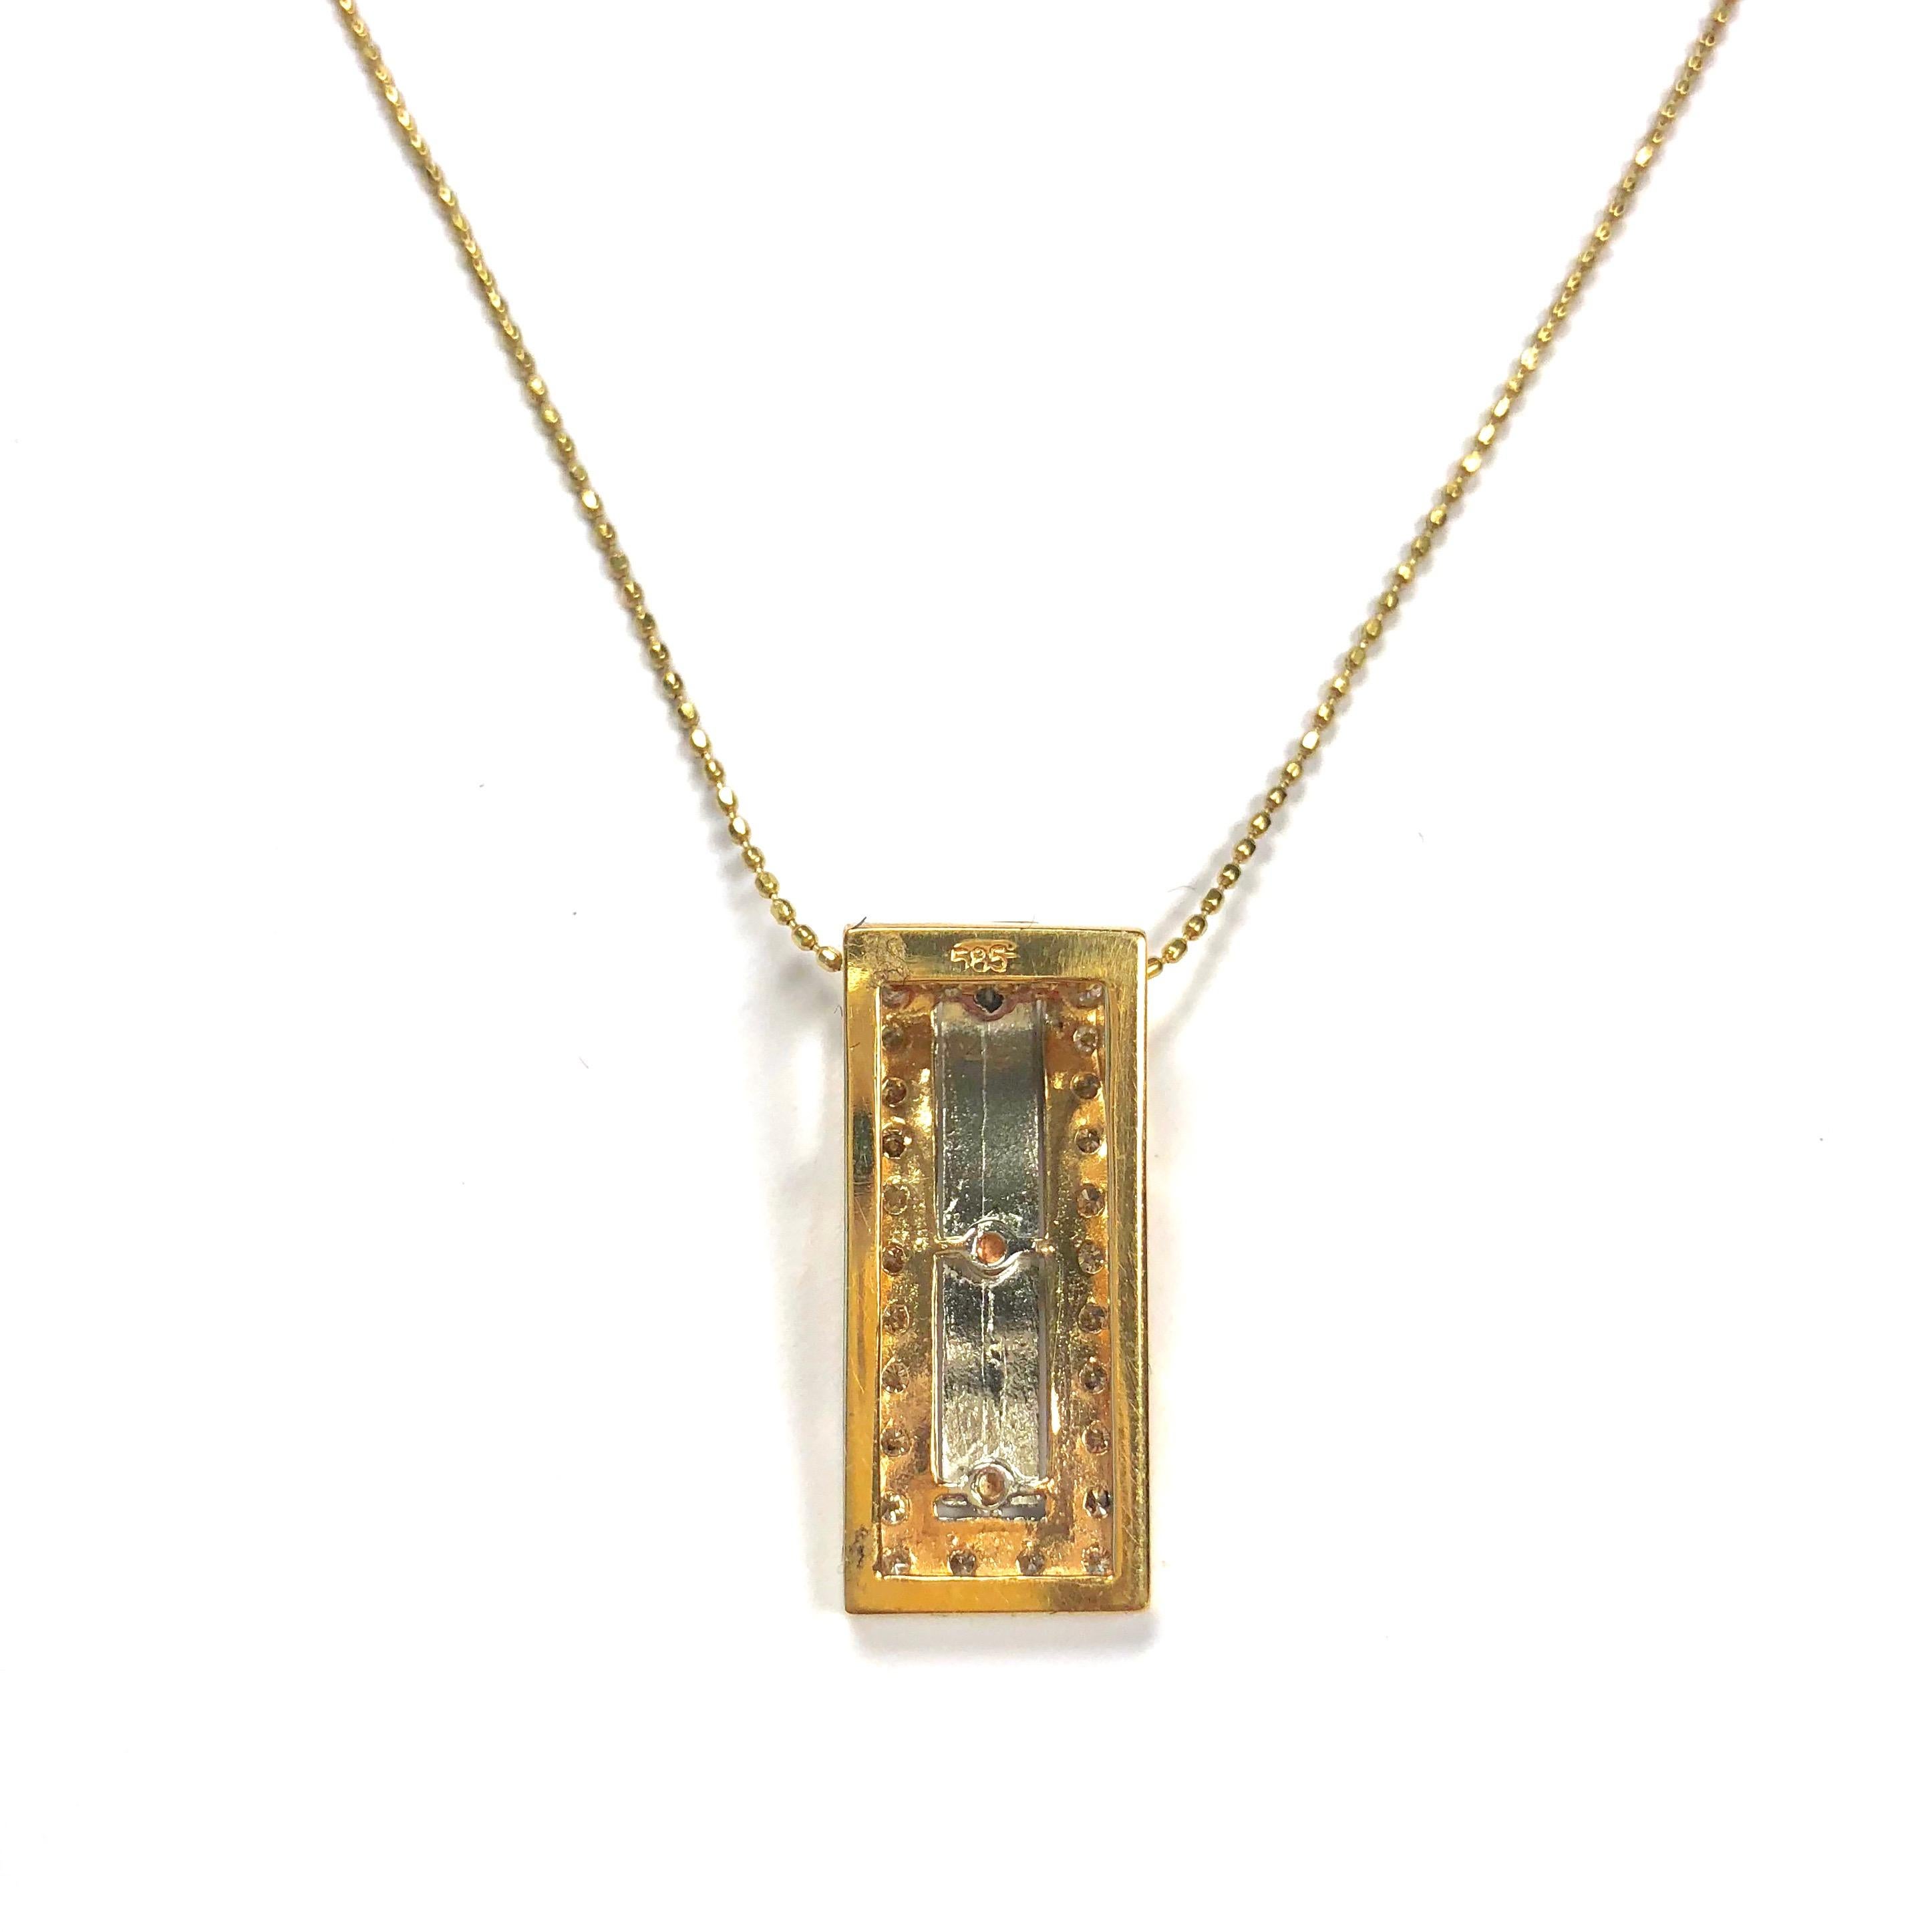 Crafted in 14K gold, the pendant features a white gold ribbon with roman numerals, set in a diamond set yellow gold bezel, supported by an eighteen inch length beaded chain. The folded ribbon style design with a large slide opening allows to put the